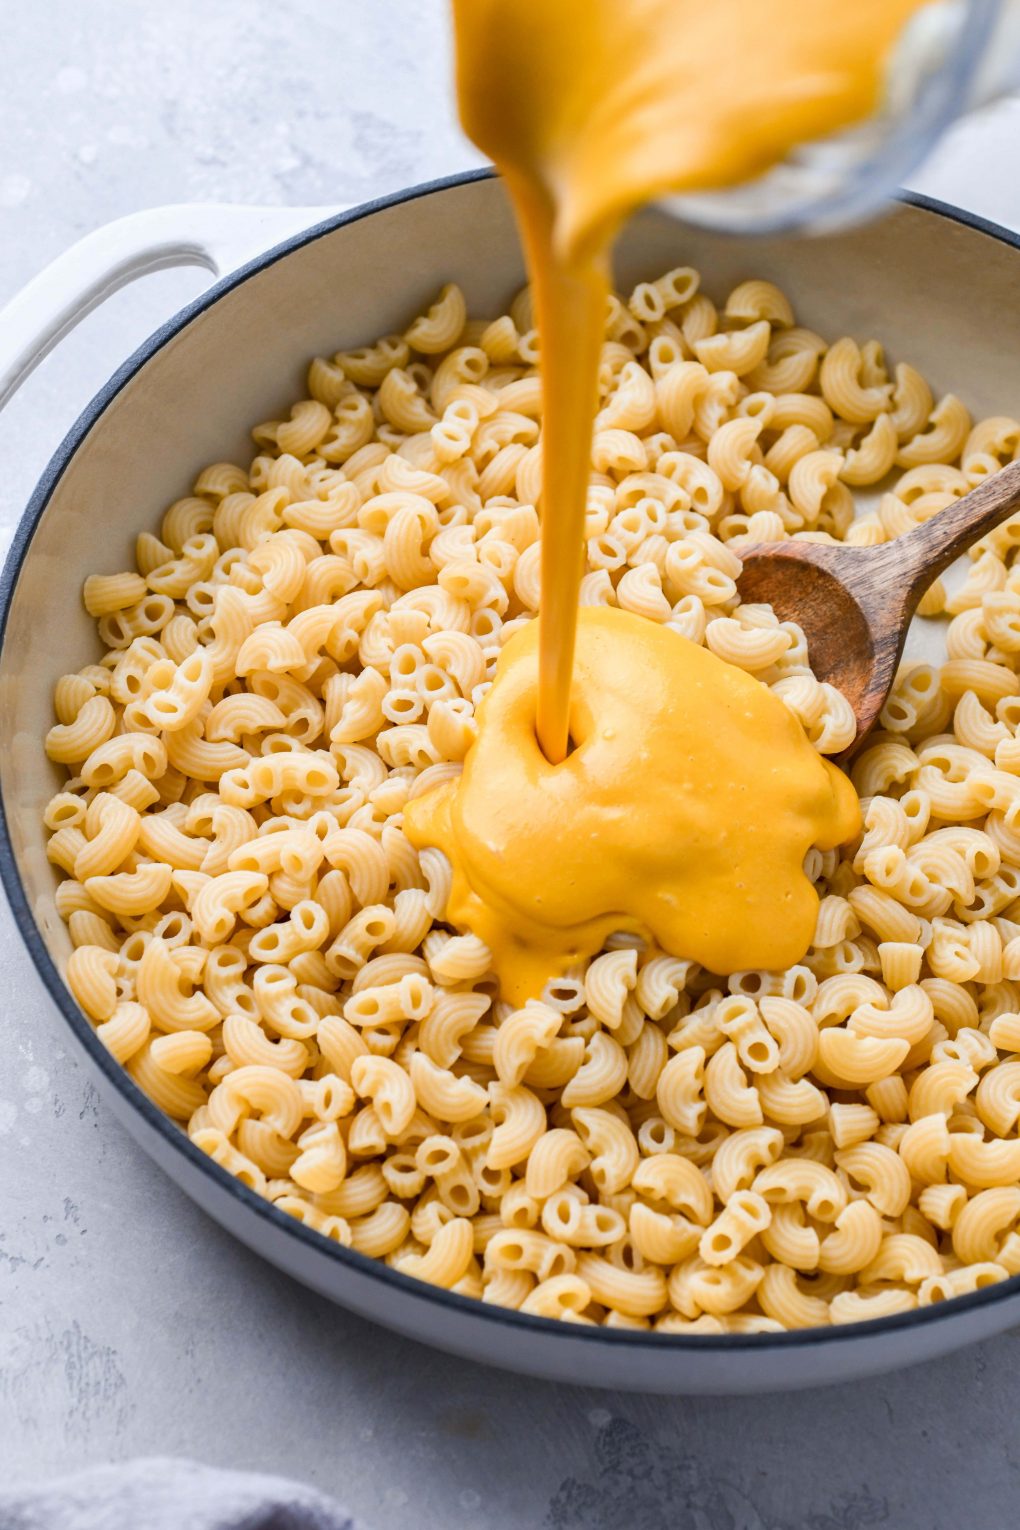 Side angle shot of creamy vegan cheese being poured into a large skillet of cooked macaroni pasta.